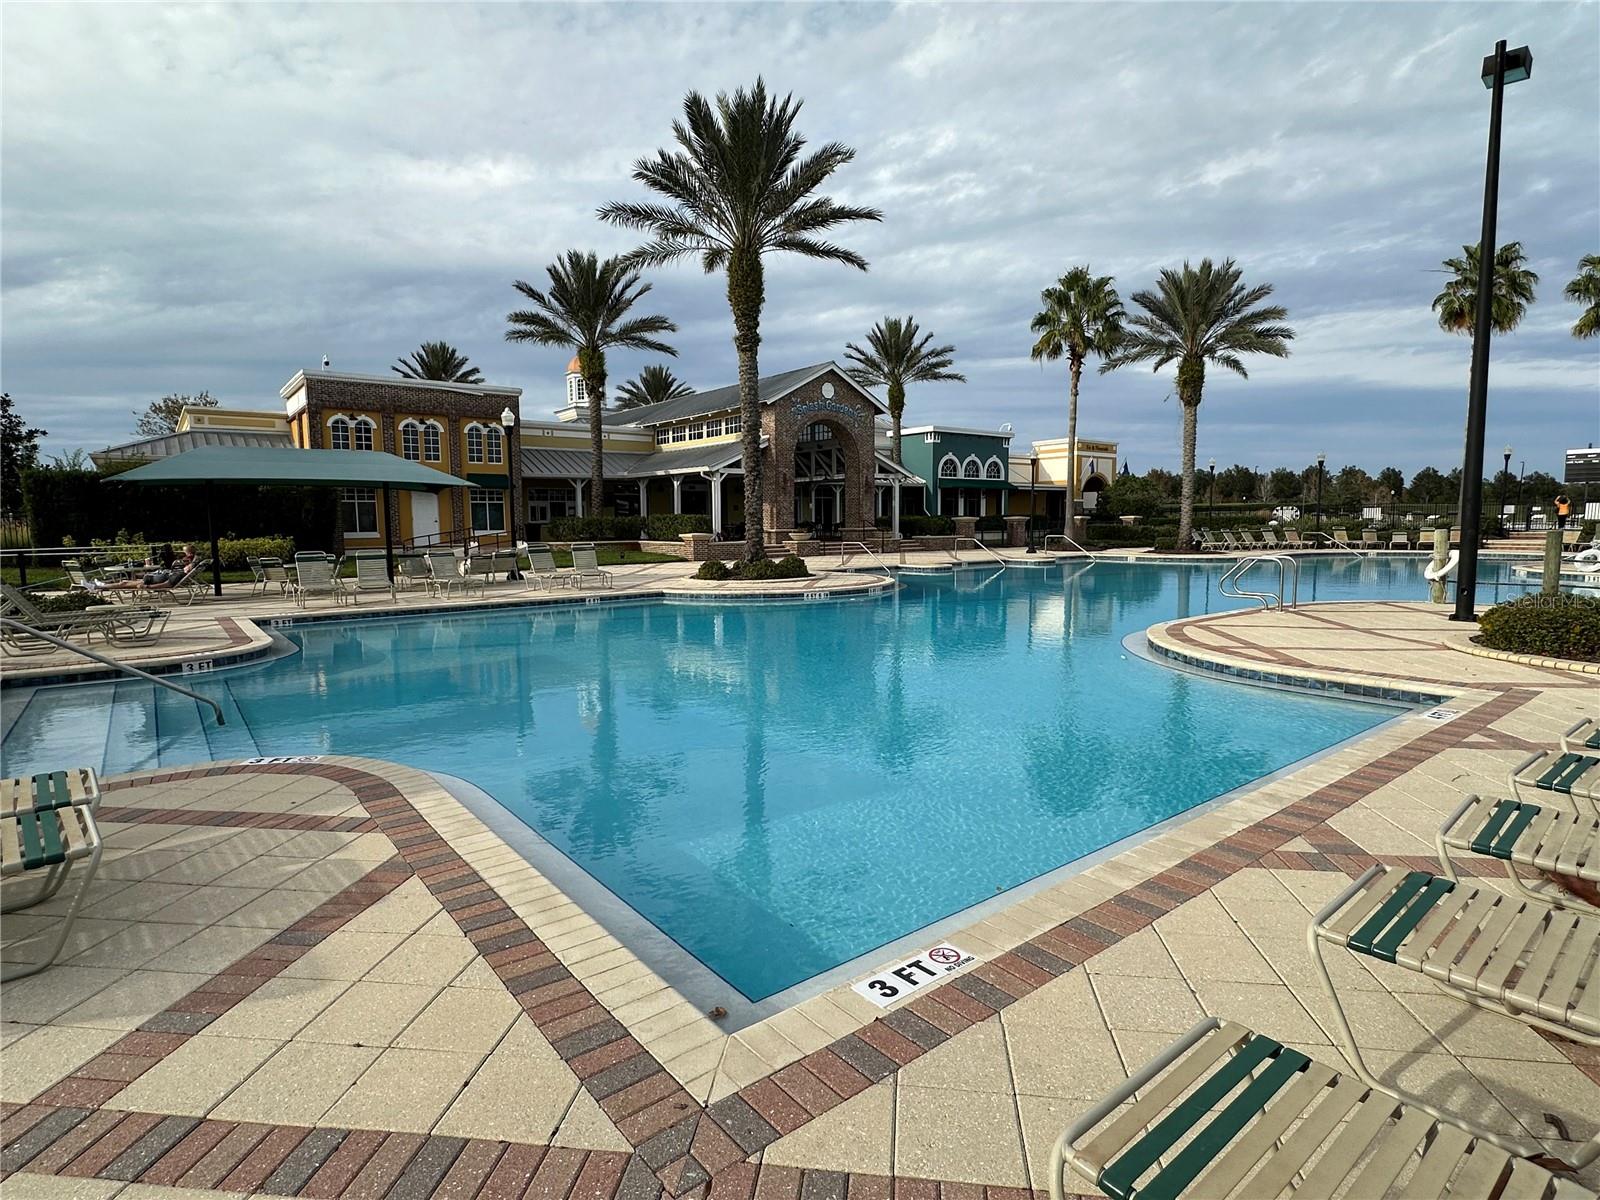 Pool at clubhouse